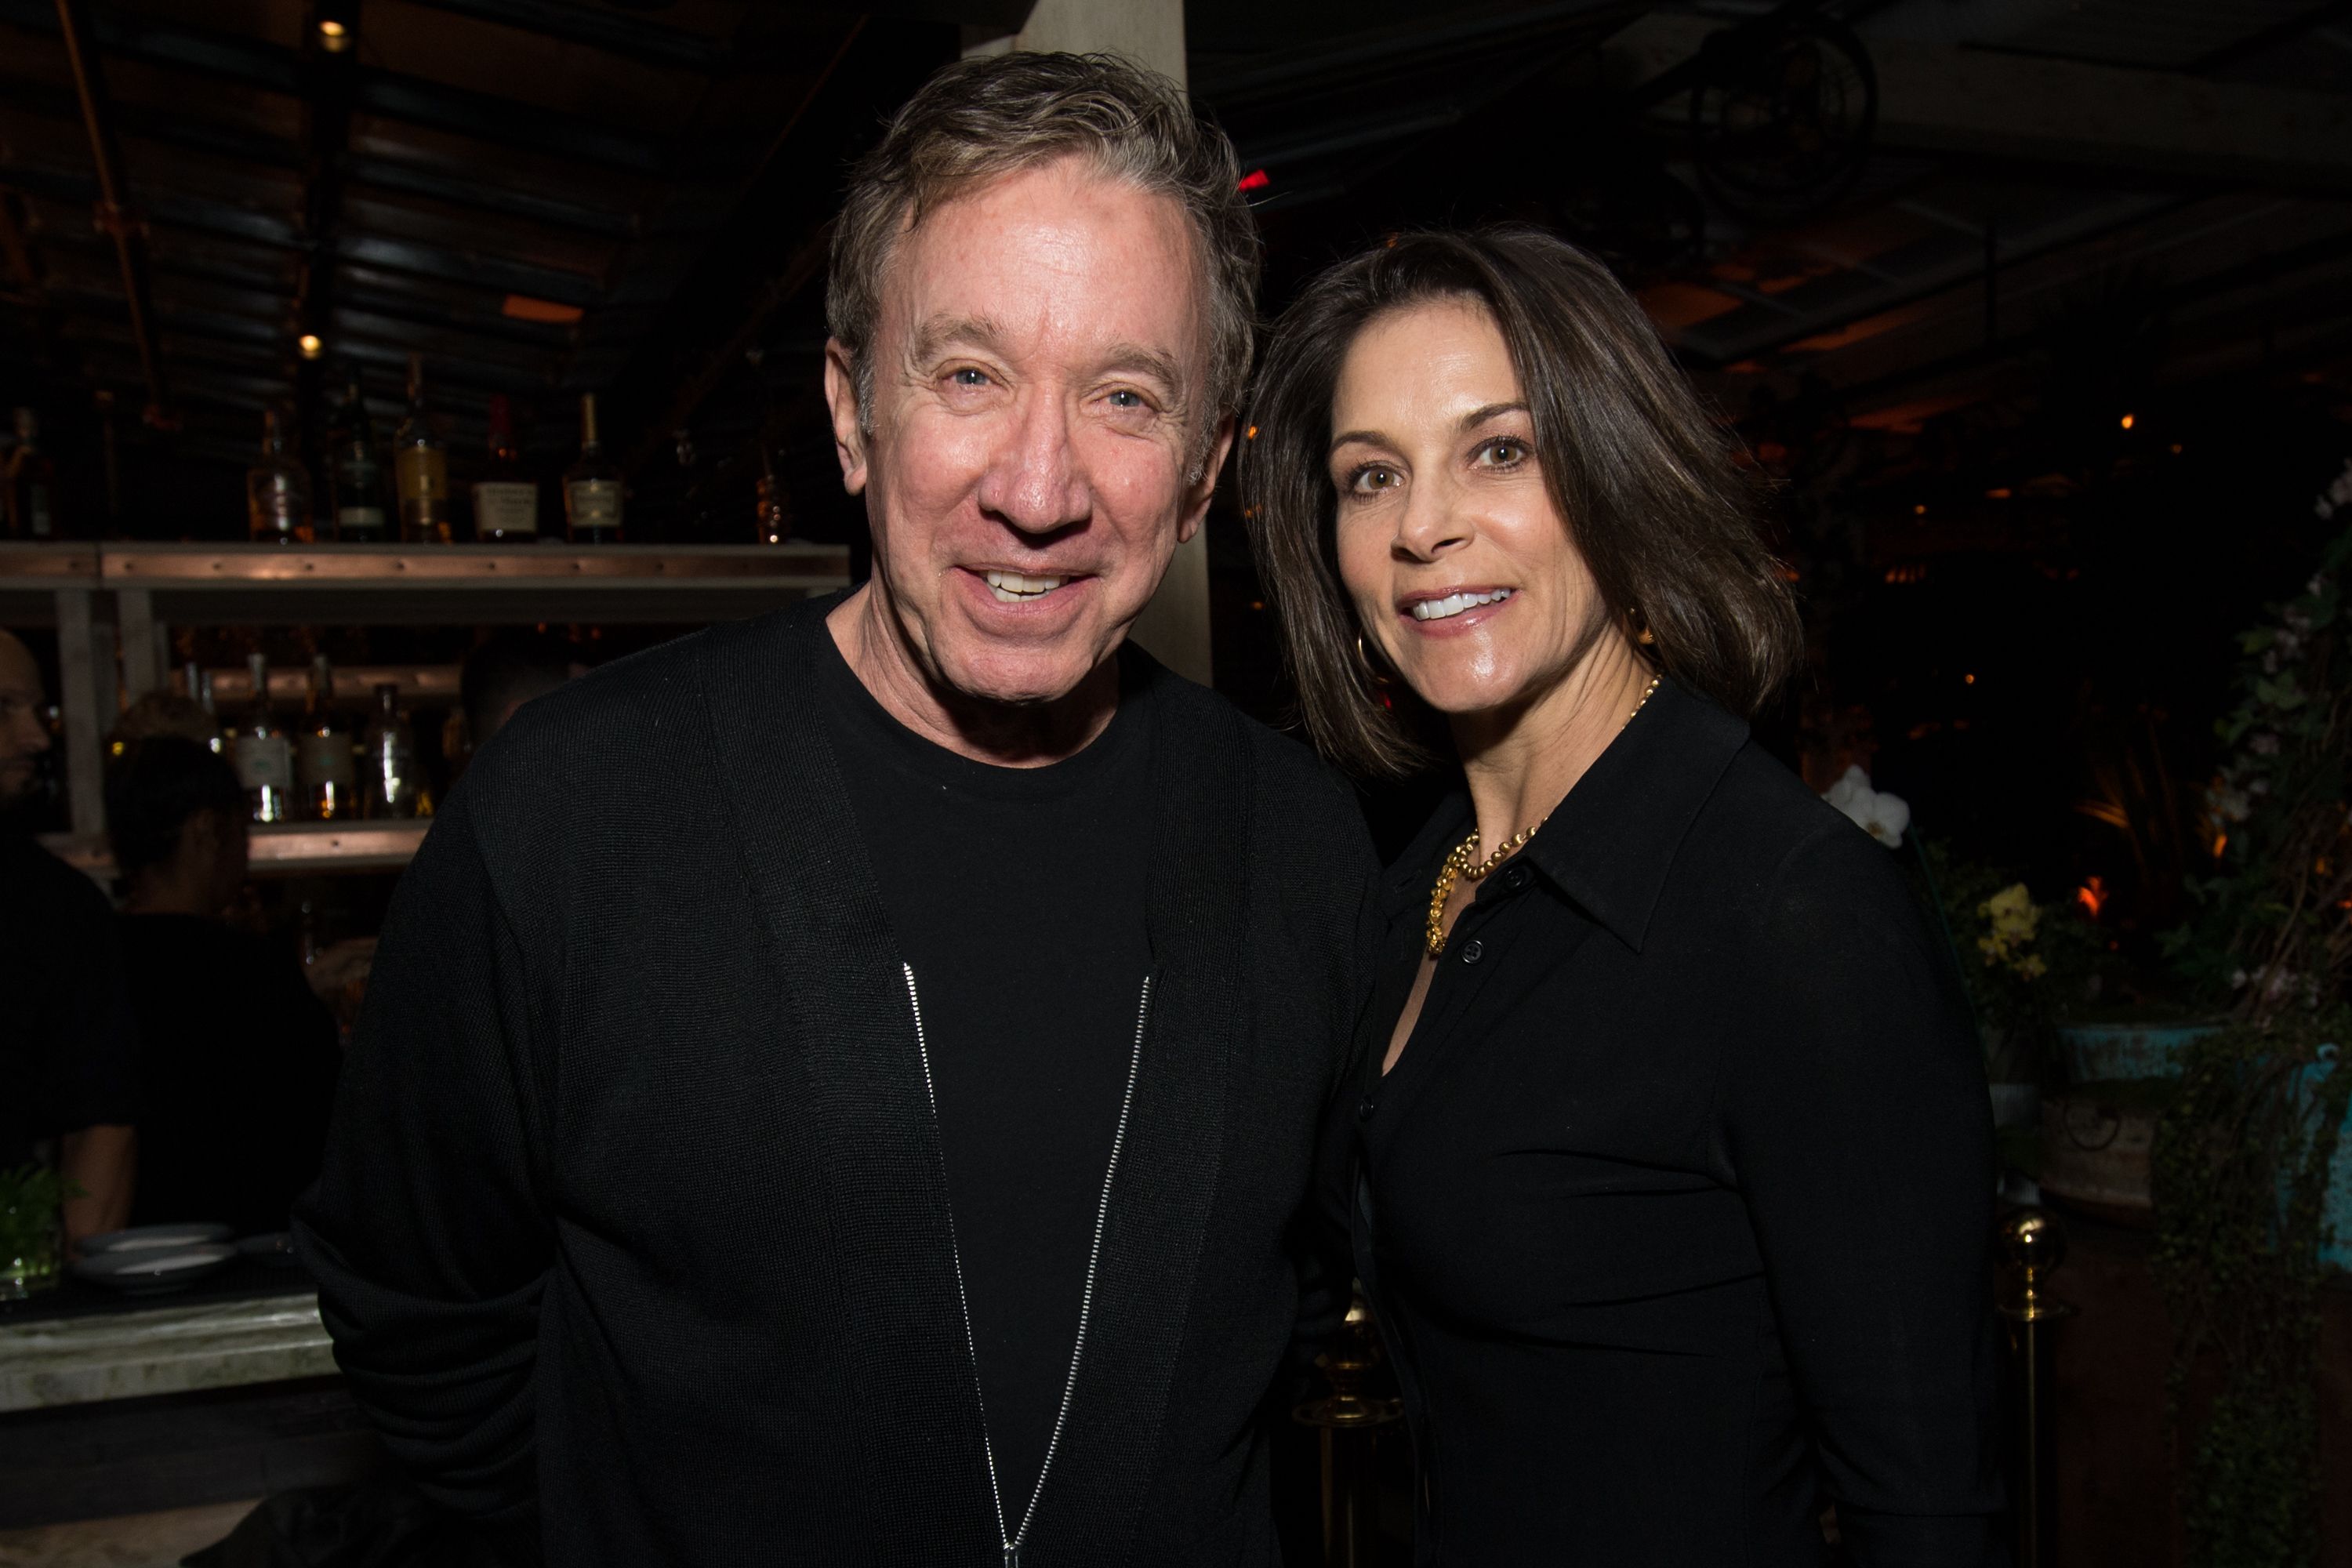 Tim Allen and Jane Hajduk during the after party for the premiere of Netflix's "Queer Eye" Season 1 at the Pacific Design Center on February 7, 2018 in West Hollywood, California. | Source: Getty Images